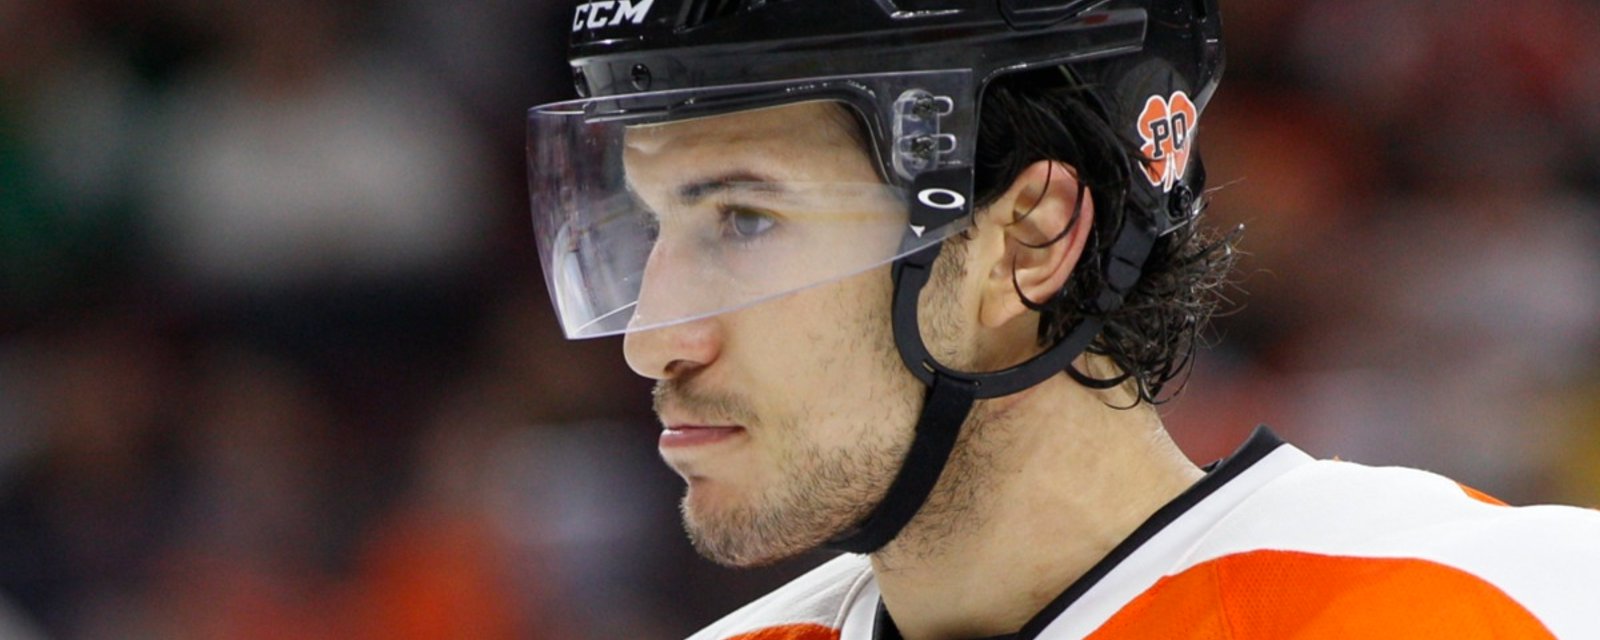 Flyers' player knows he could be traded shortly.